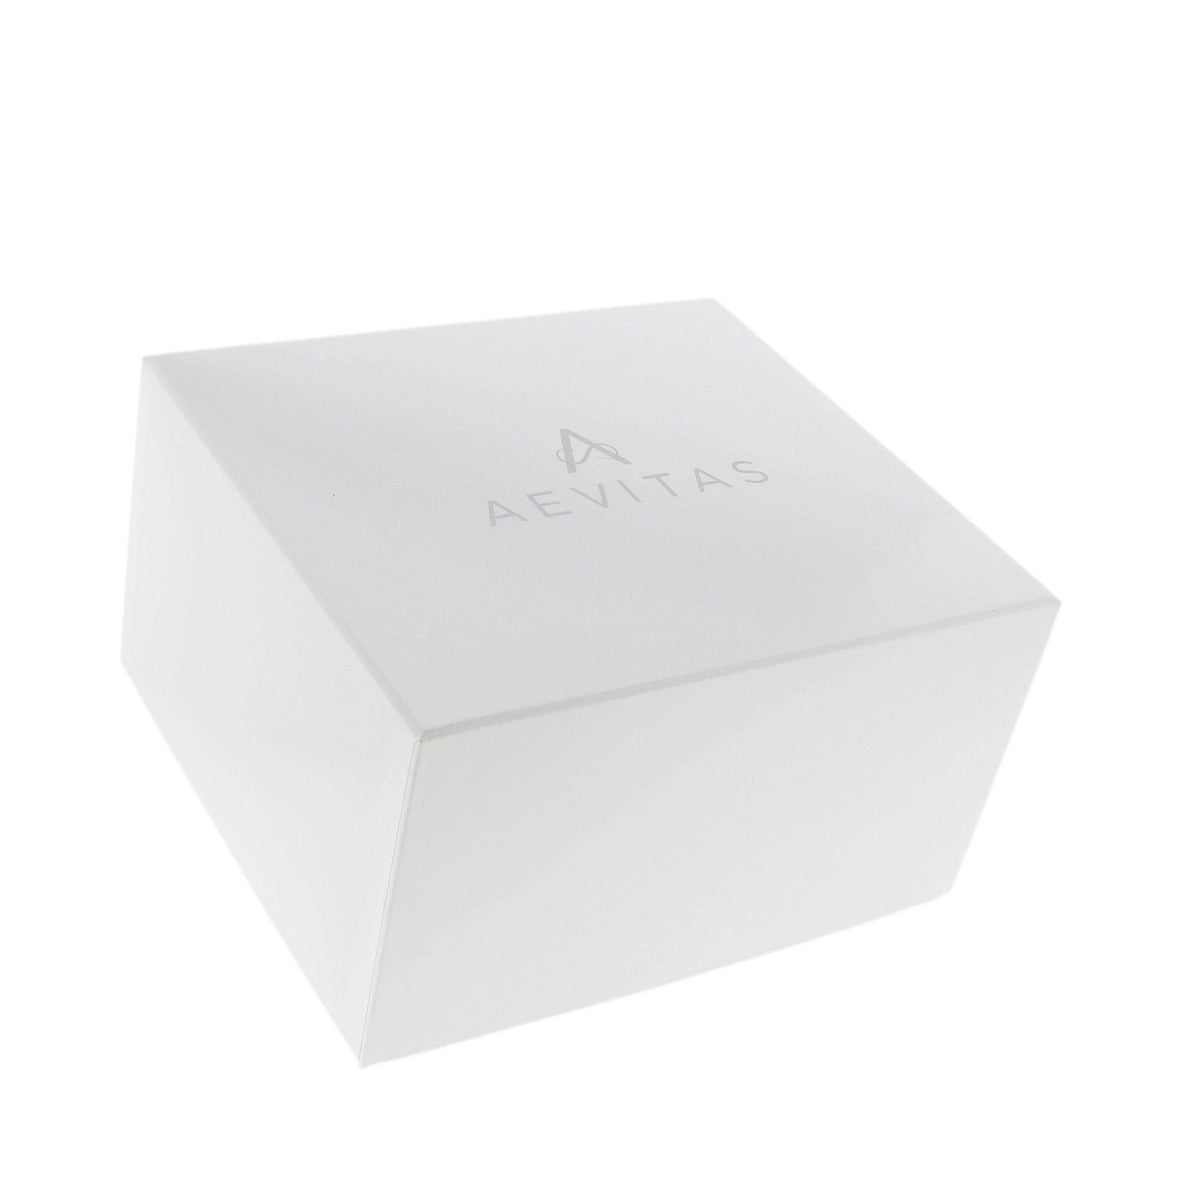 Finest Quality Large Size Ivory Bonded Leather Jewellery Box by Aevitas